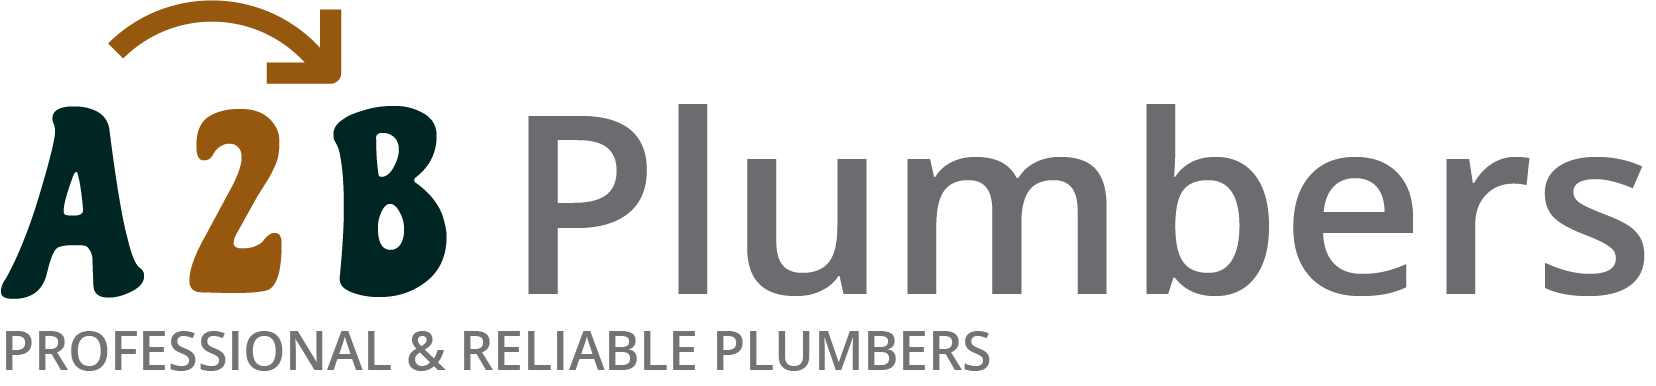 If you need a boiler installed, a radiator repaired or a leaking tap fixed, call us now - we provide services for properties in Palmers Green and the local area.